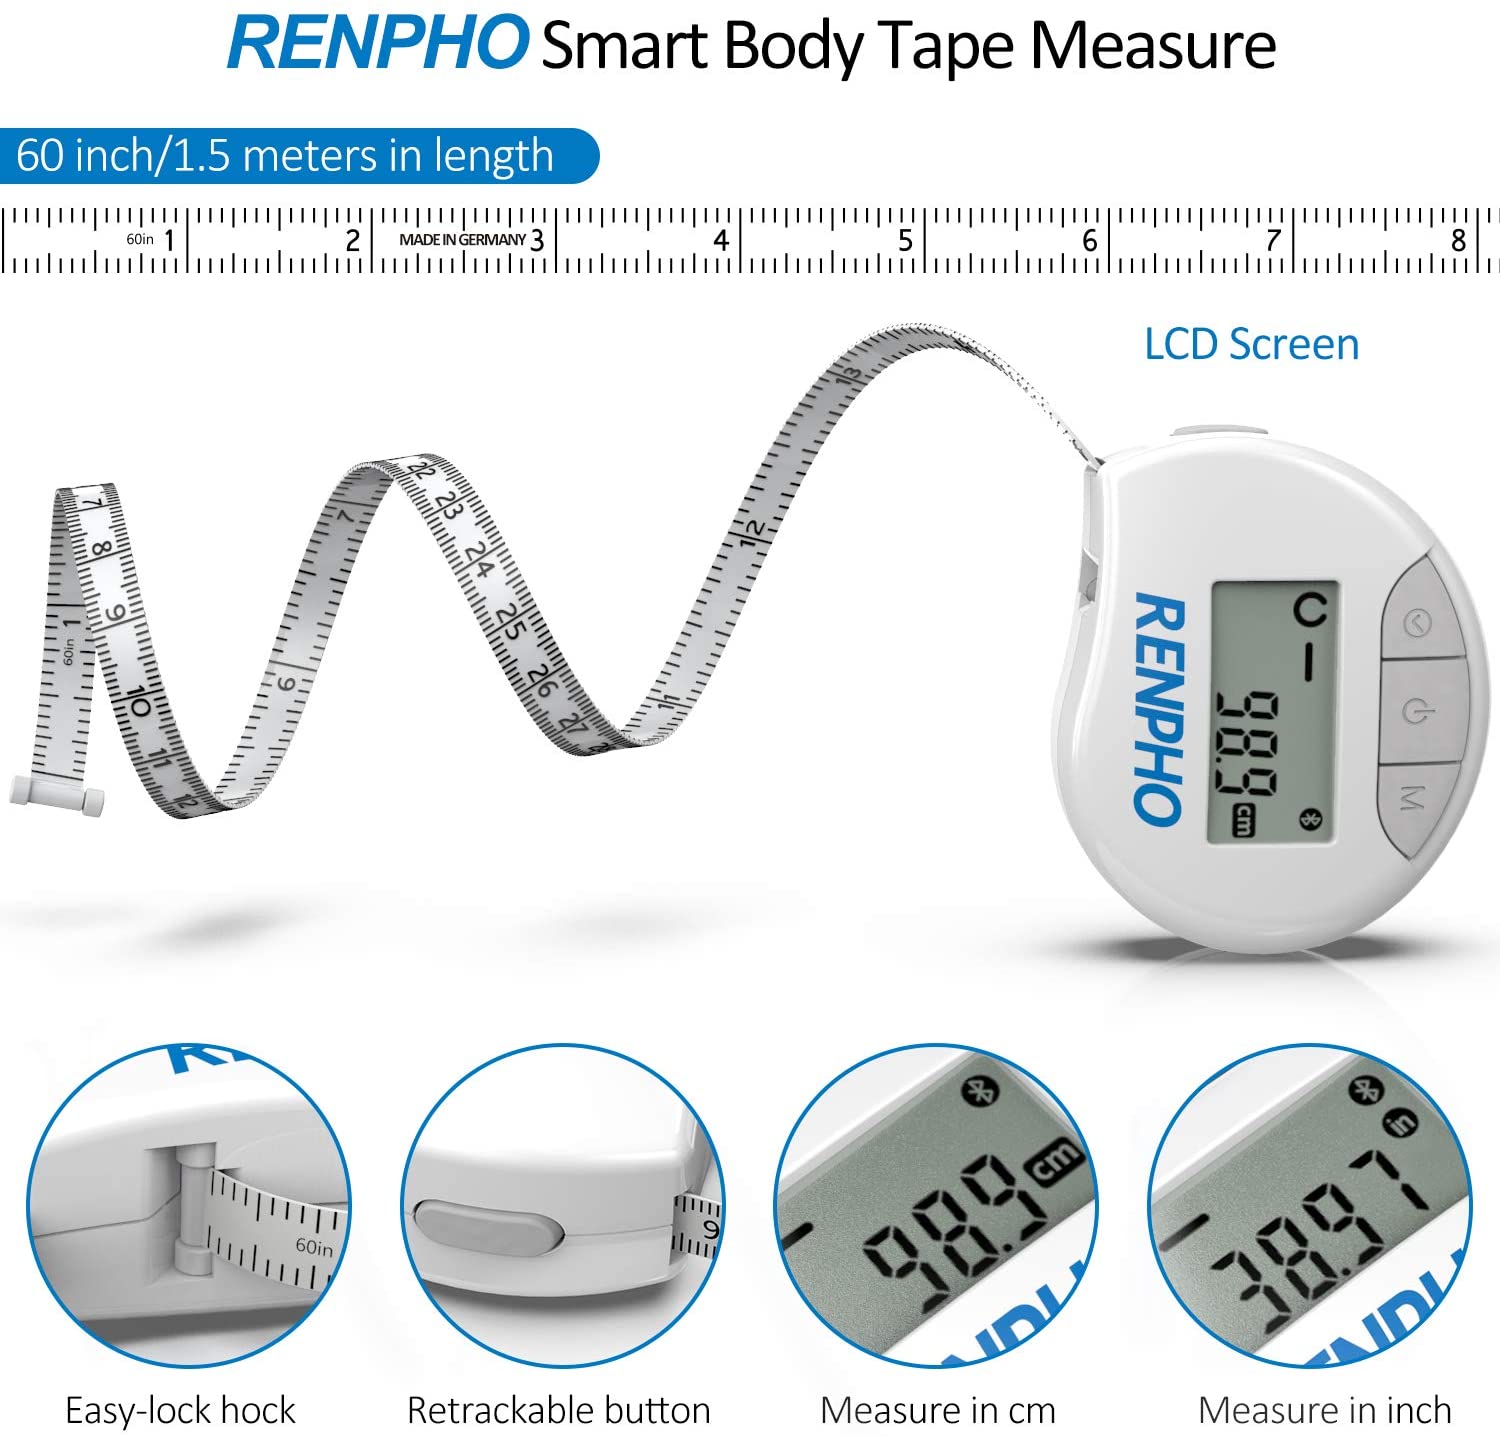 60inch/150cm Body Measuring Tape with App - RENPHO Bluetooth Measuring  Tapes for Body Measuring, Retractable Button, Easy-Lock Hook, LED Monitor  Display 